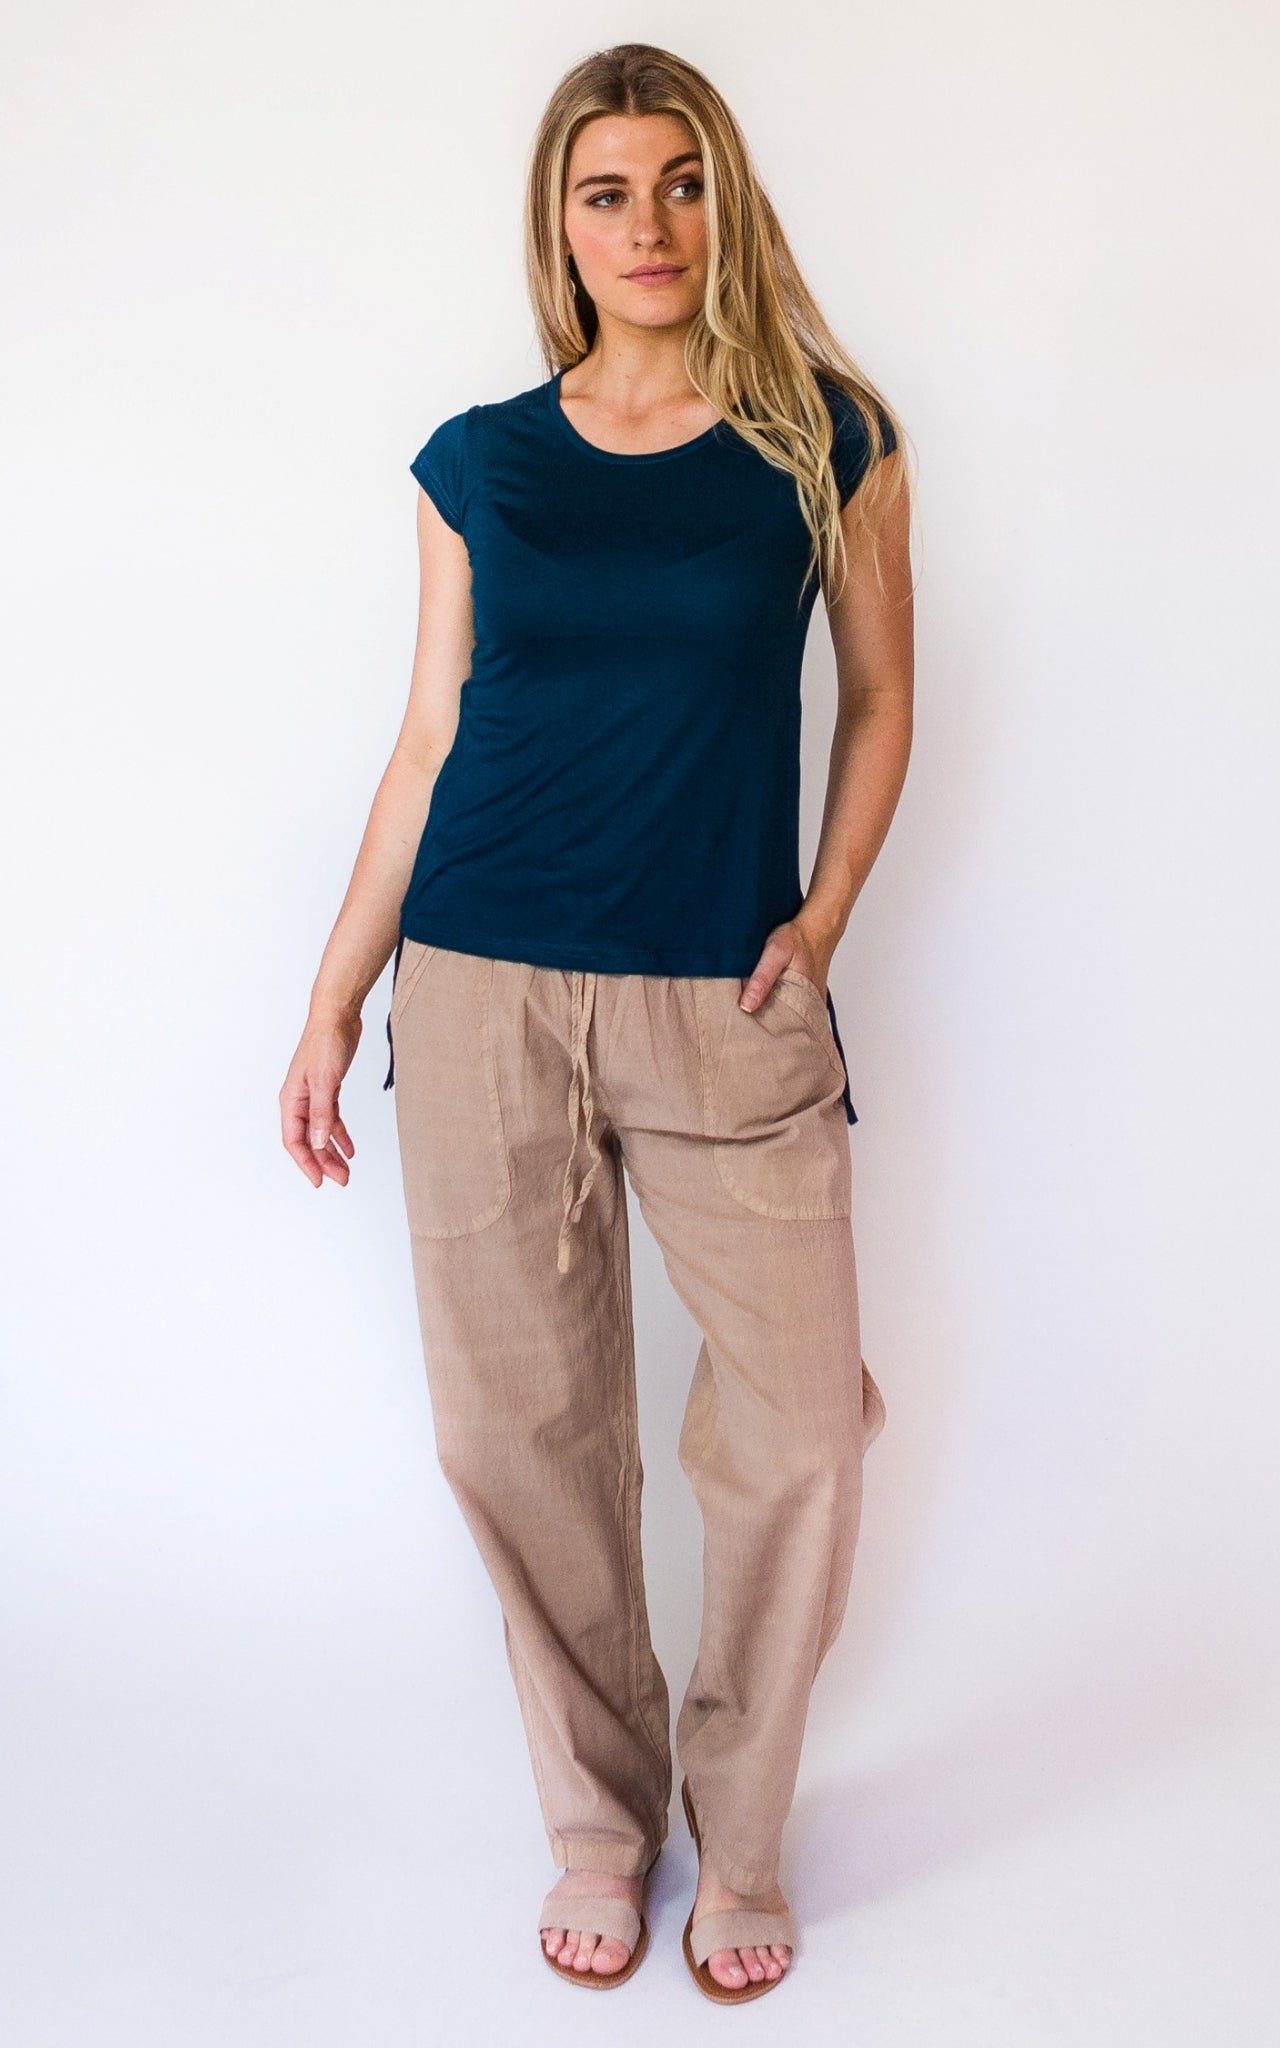 Surya Australia Ethical Cotton Loose Pants from Nepal - Sand